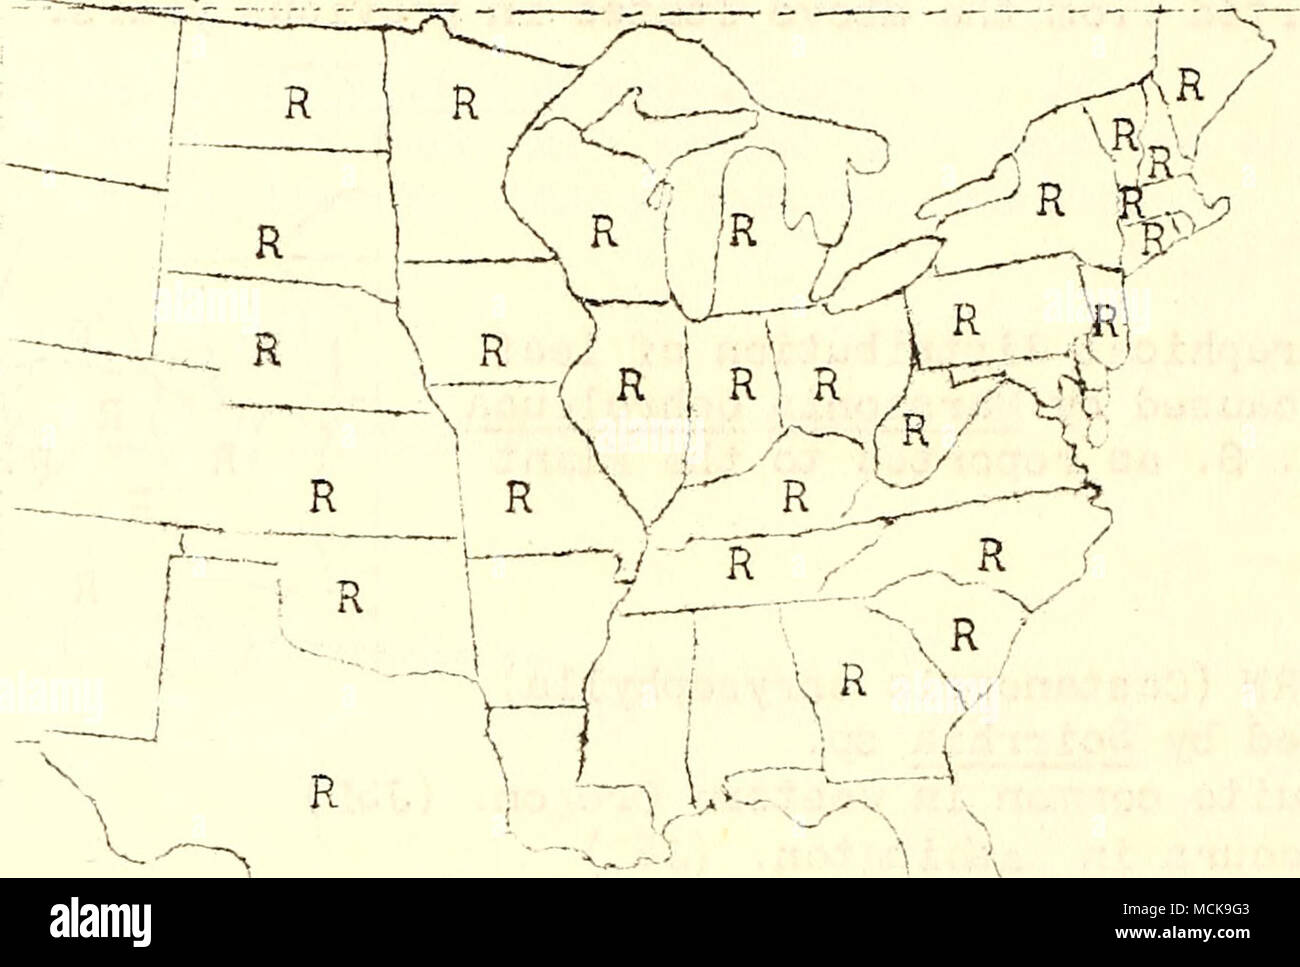 . Fig. 92- Geographical distritvitibh of'anthracnose 'of the elm in the U. as reported to tlit Plant Disease Siirvey. Nev/ York - found in state wherever elms are grown, earliest report in July, only certain trees are badly affected, the branches may intertwine v/ith other elm. trees that are wholly free from disease. Kilian, Charles. Le developpement du Dothdella ulmea(i&gt;uv.) V/inter. Rev Gen. lot. 32: 534-551- Pi. I0-I9. Dec 1^20. No. 384 Index   bibliographique: p. 551- Powdery mildew caused Uncinula macrospora ?k. Ohio - usually found on elms throughout state. (IP) Root ro t caused by Q Stock Photo